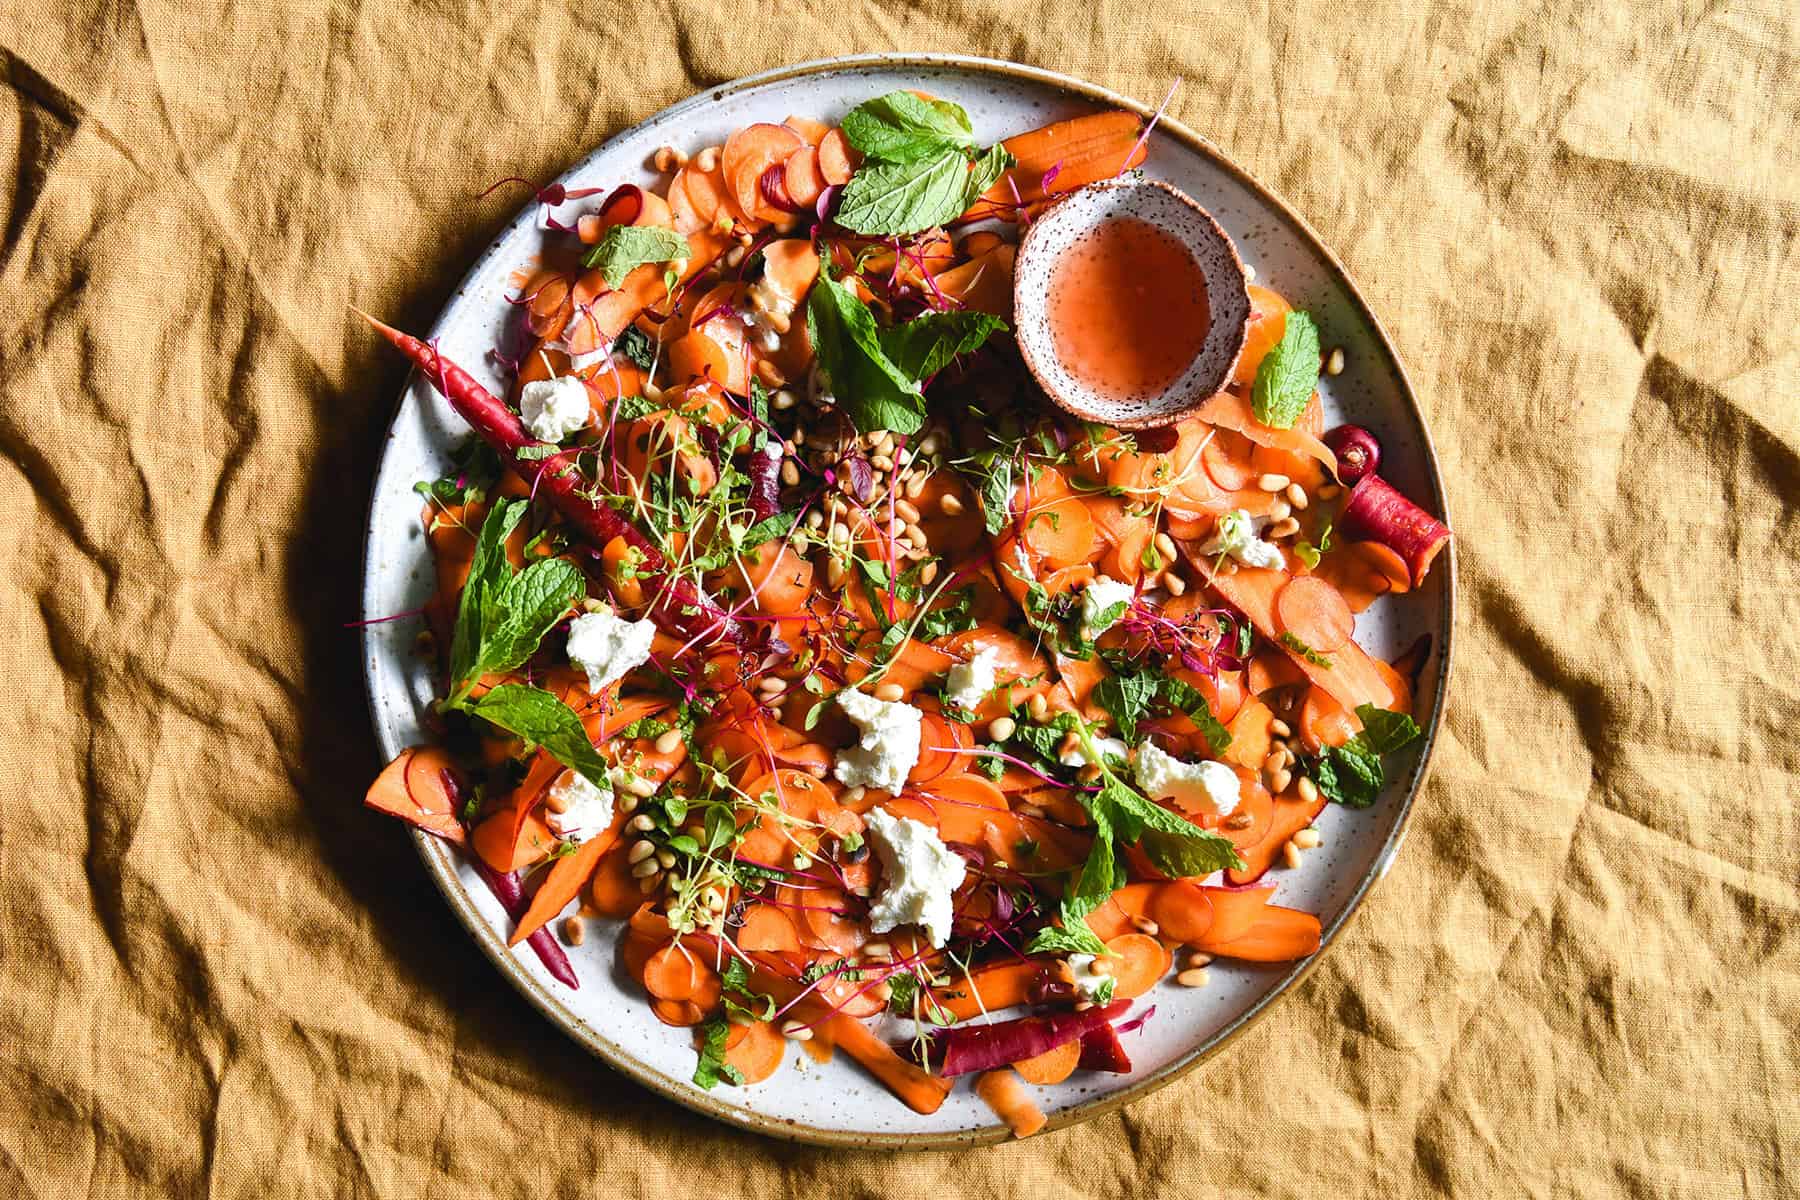 Shaved carrot salad with goat's cheese, toasted pine nuts, mint and an orange blossom, lemon and Campari dressing on a white ceramic plate atop a turmeric coloured linen tablecloth.